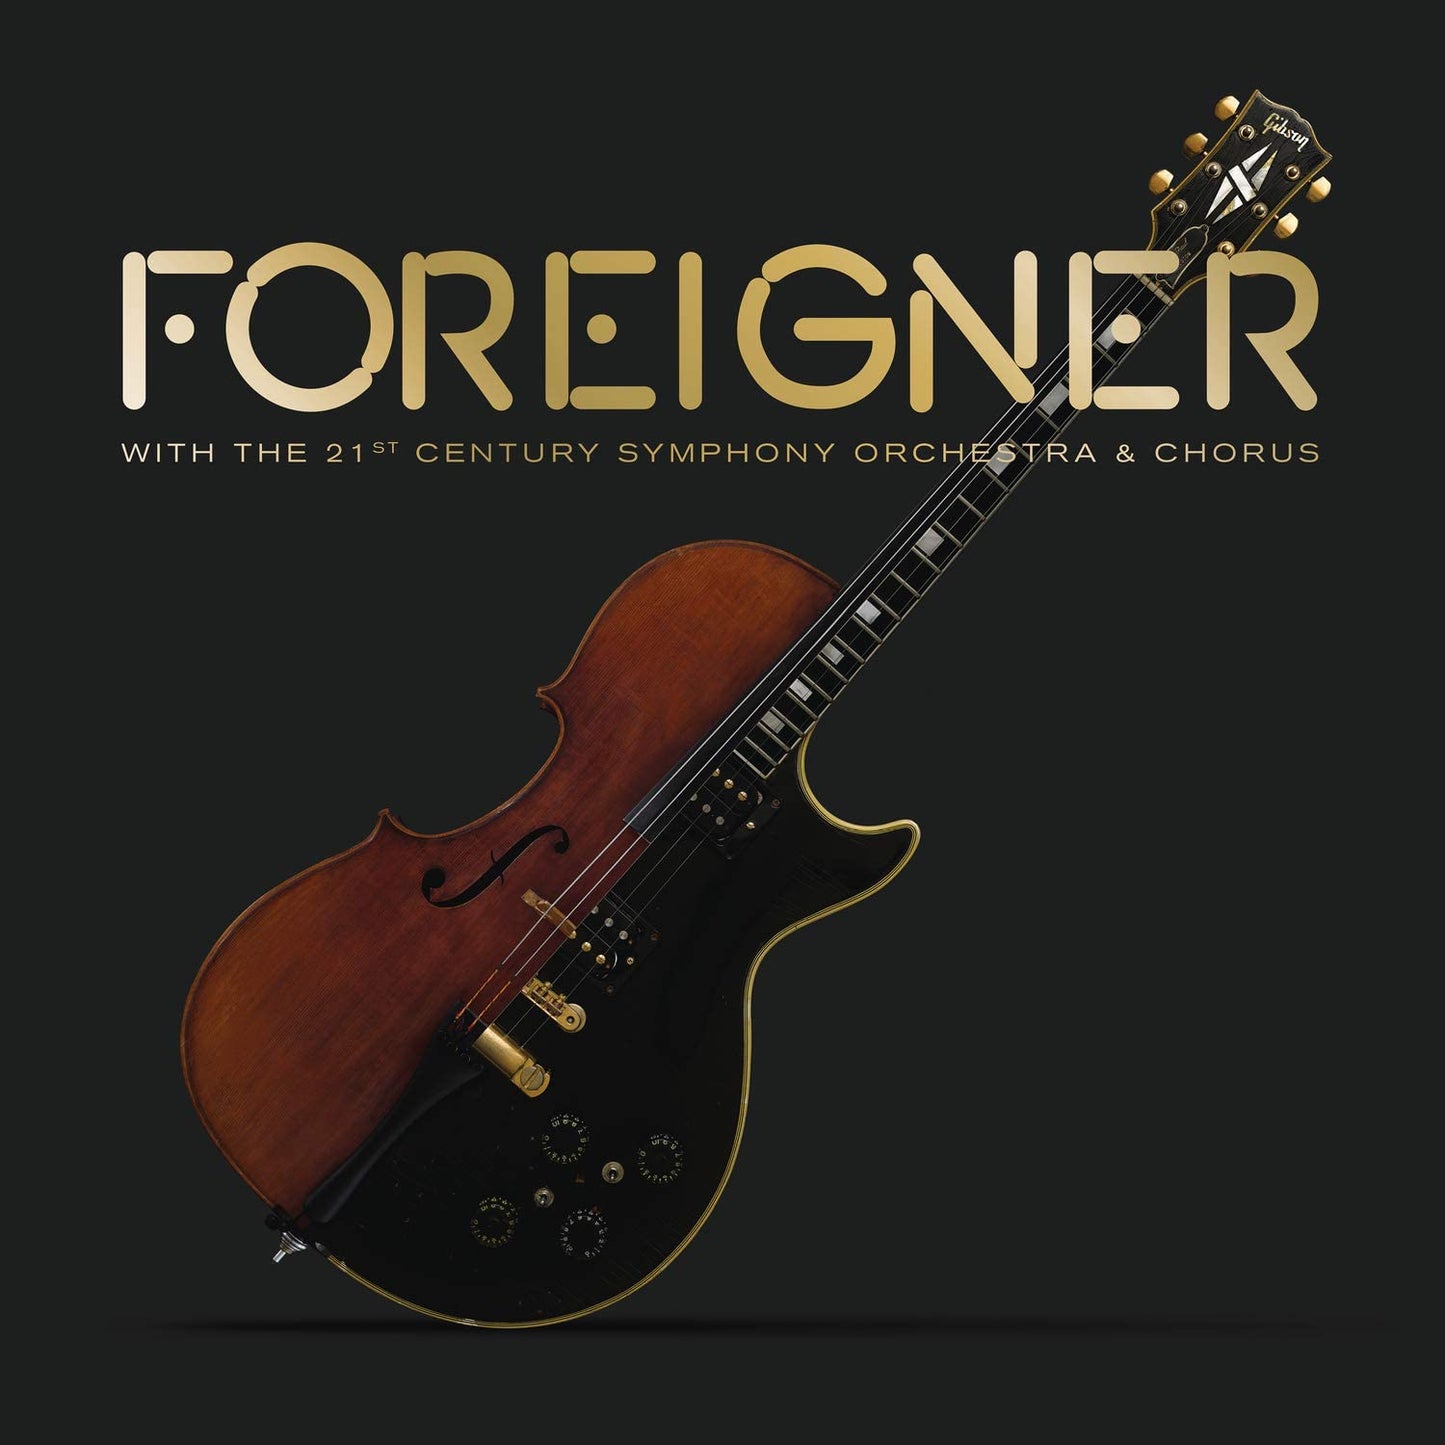 Foreigner - With The 21st Century Symphony Orchestra & Chorus - CD